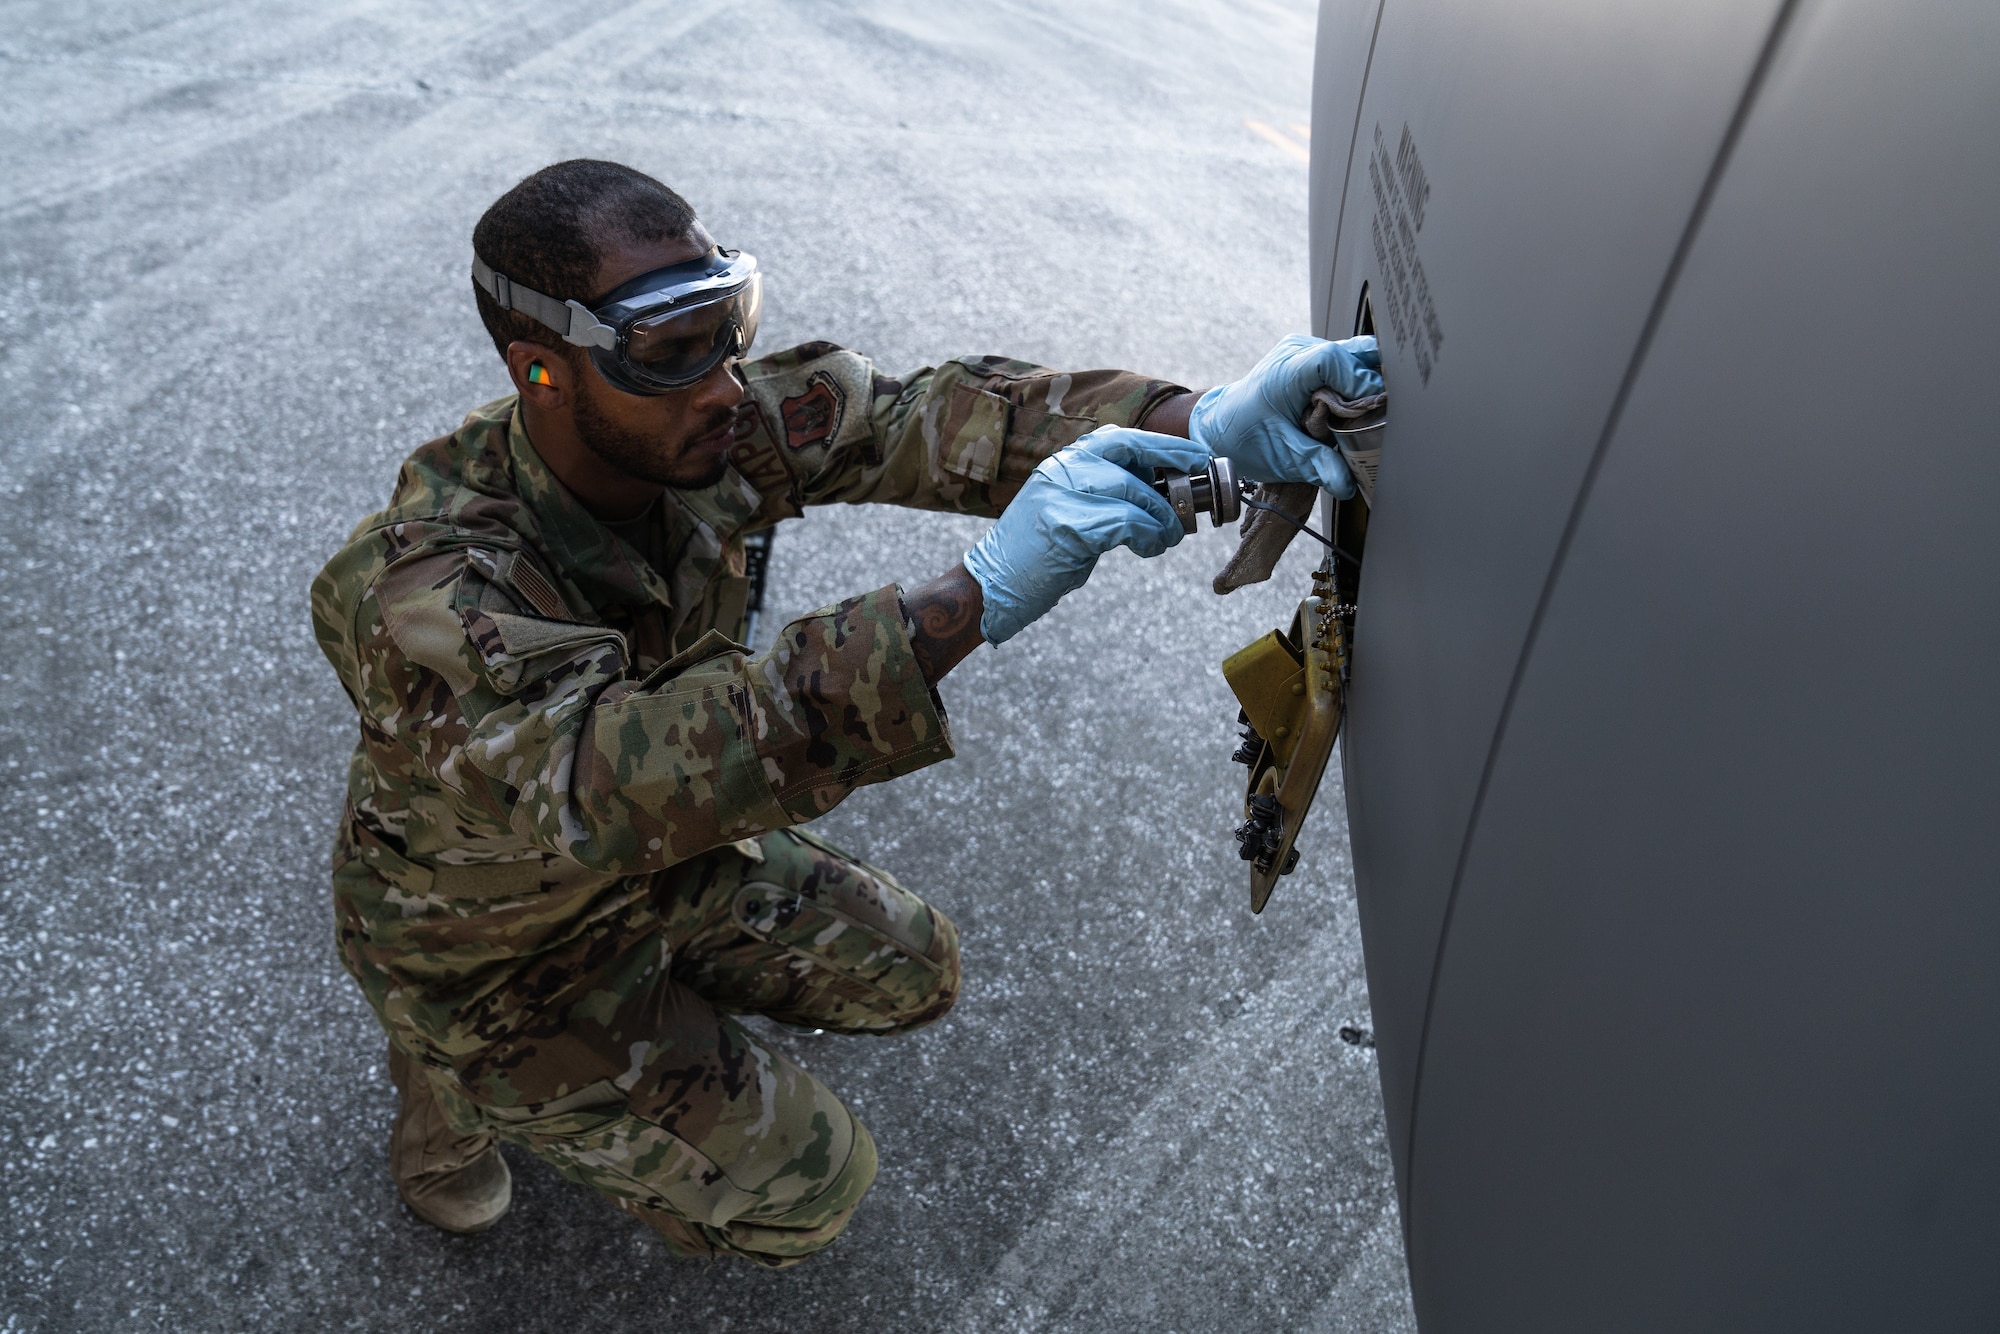 U.S. Air Force Staff Sgt. Korey Hunt, 927th Aircraft Maintenance Squadron crew chief, services engine oil on a KC-135 Stratotanker aircraft assigned to the 6th Air Refueling Wing during a nuclear operational readiness exercise at MacDill Air Force Base, Florida, Nov. 5, 2022. The exercise allowed the 6th ARW to strengthen and refine operations, techniques and procedures in a simulated emergency response. (U.S. Air Force photo by Airman 1st Class Joshua Hastings)